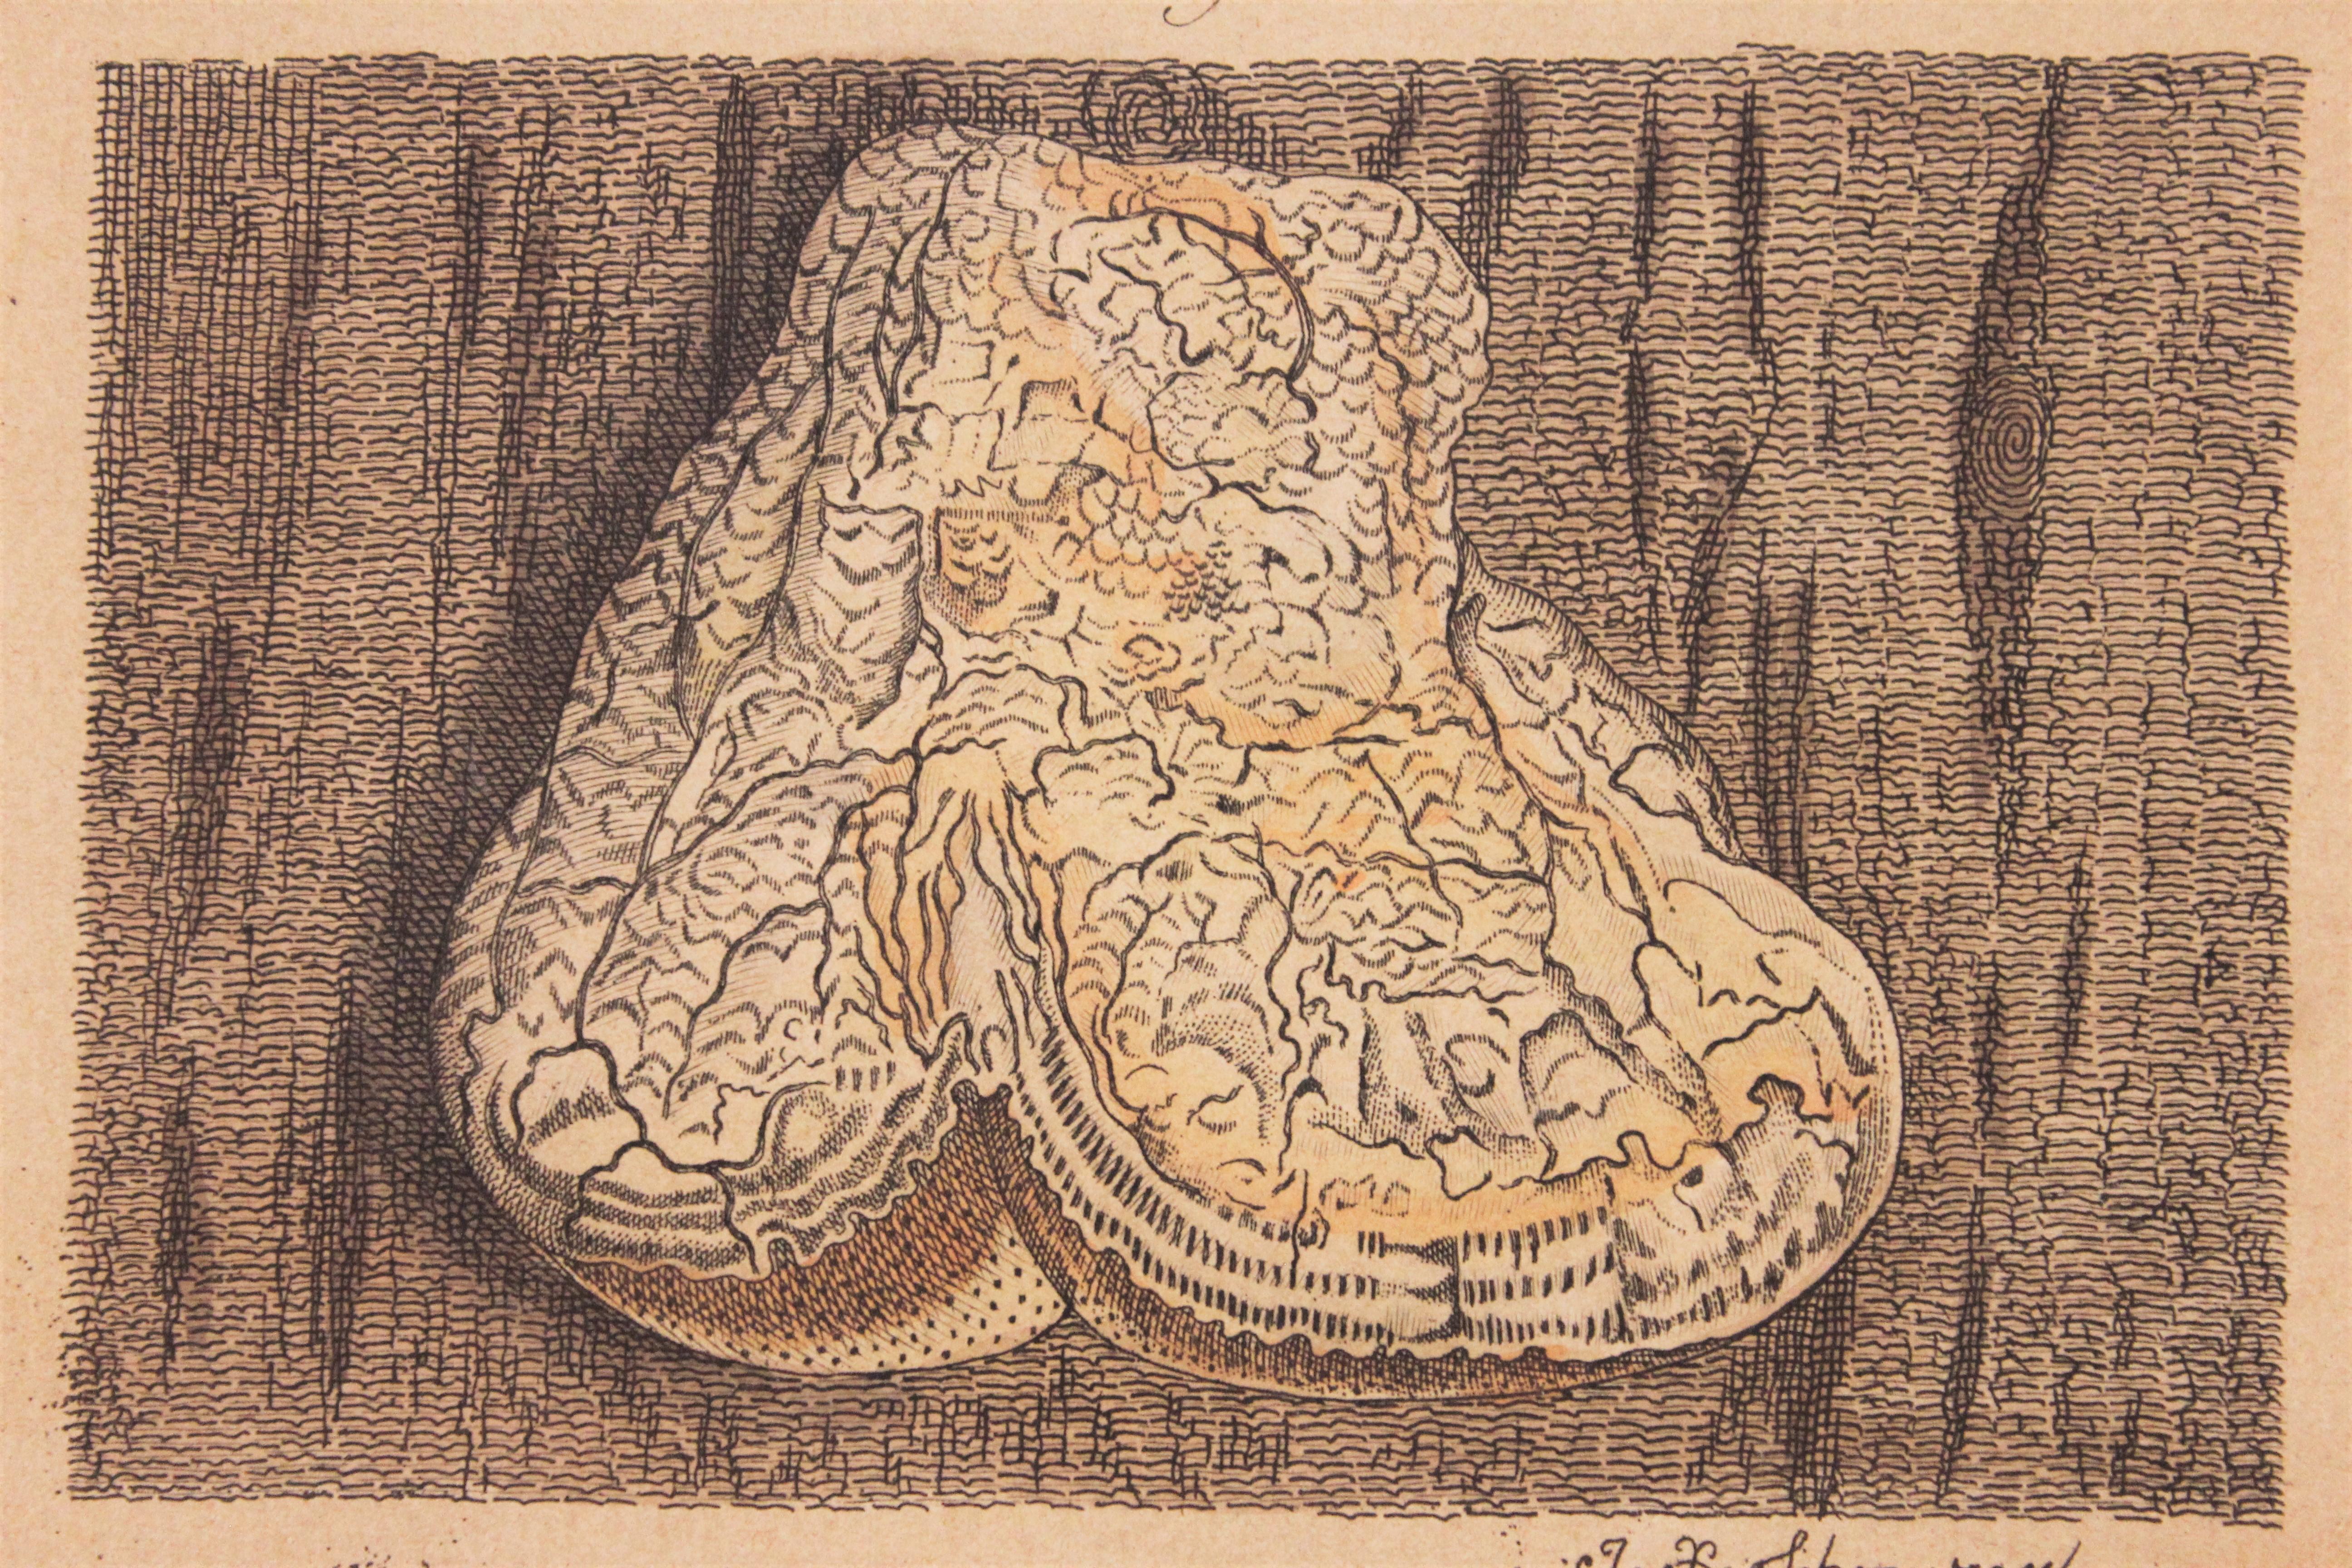 Clam Engraving on Laid Paper with Orange Tints - Print by Jacob Xaver Schmuzer